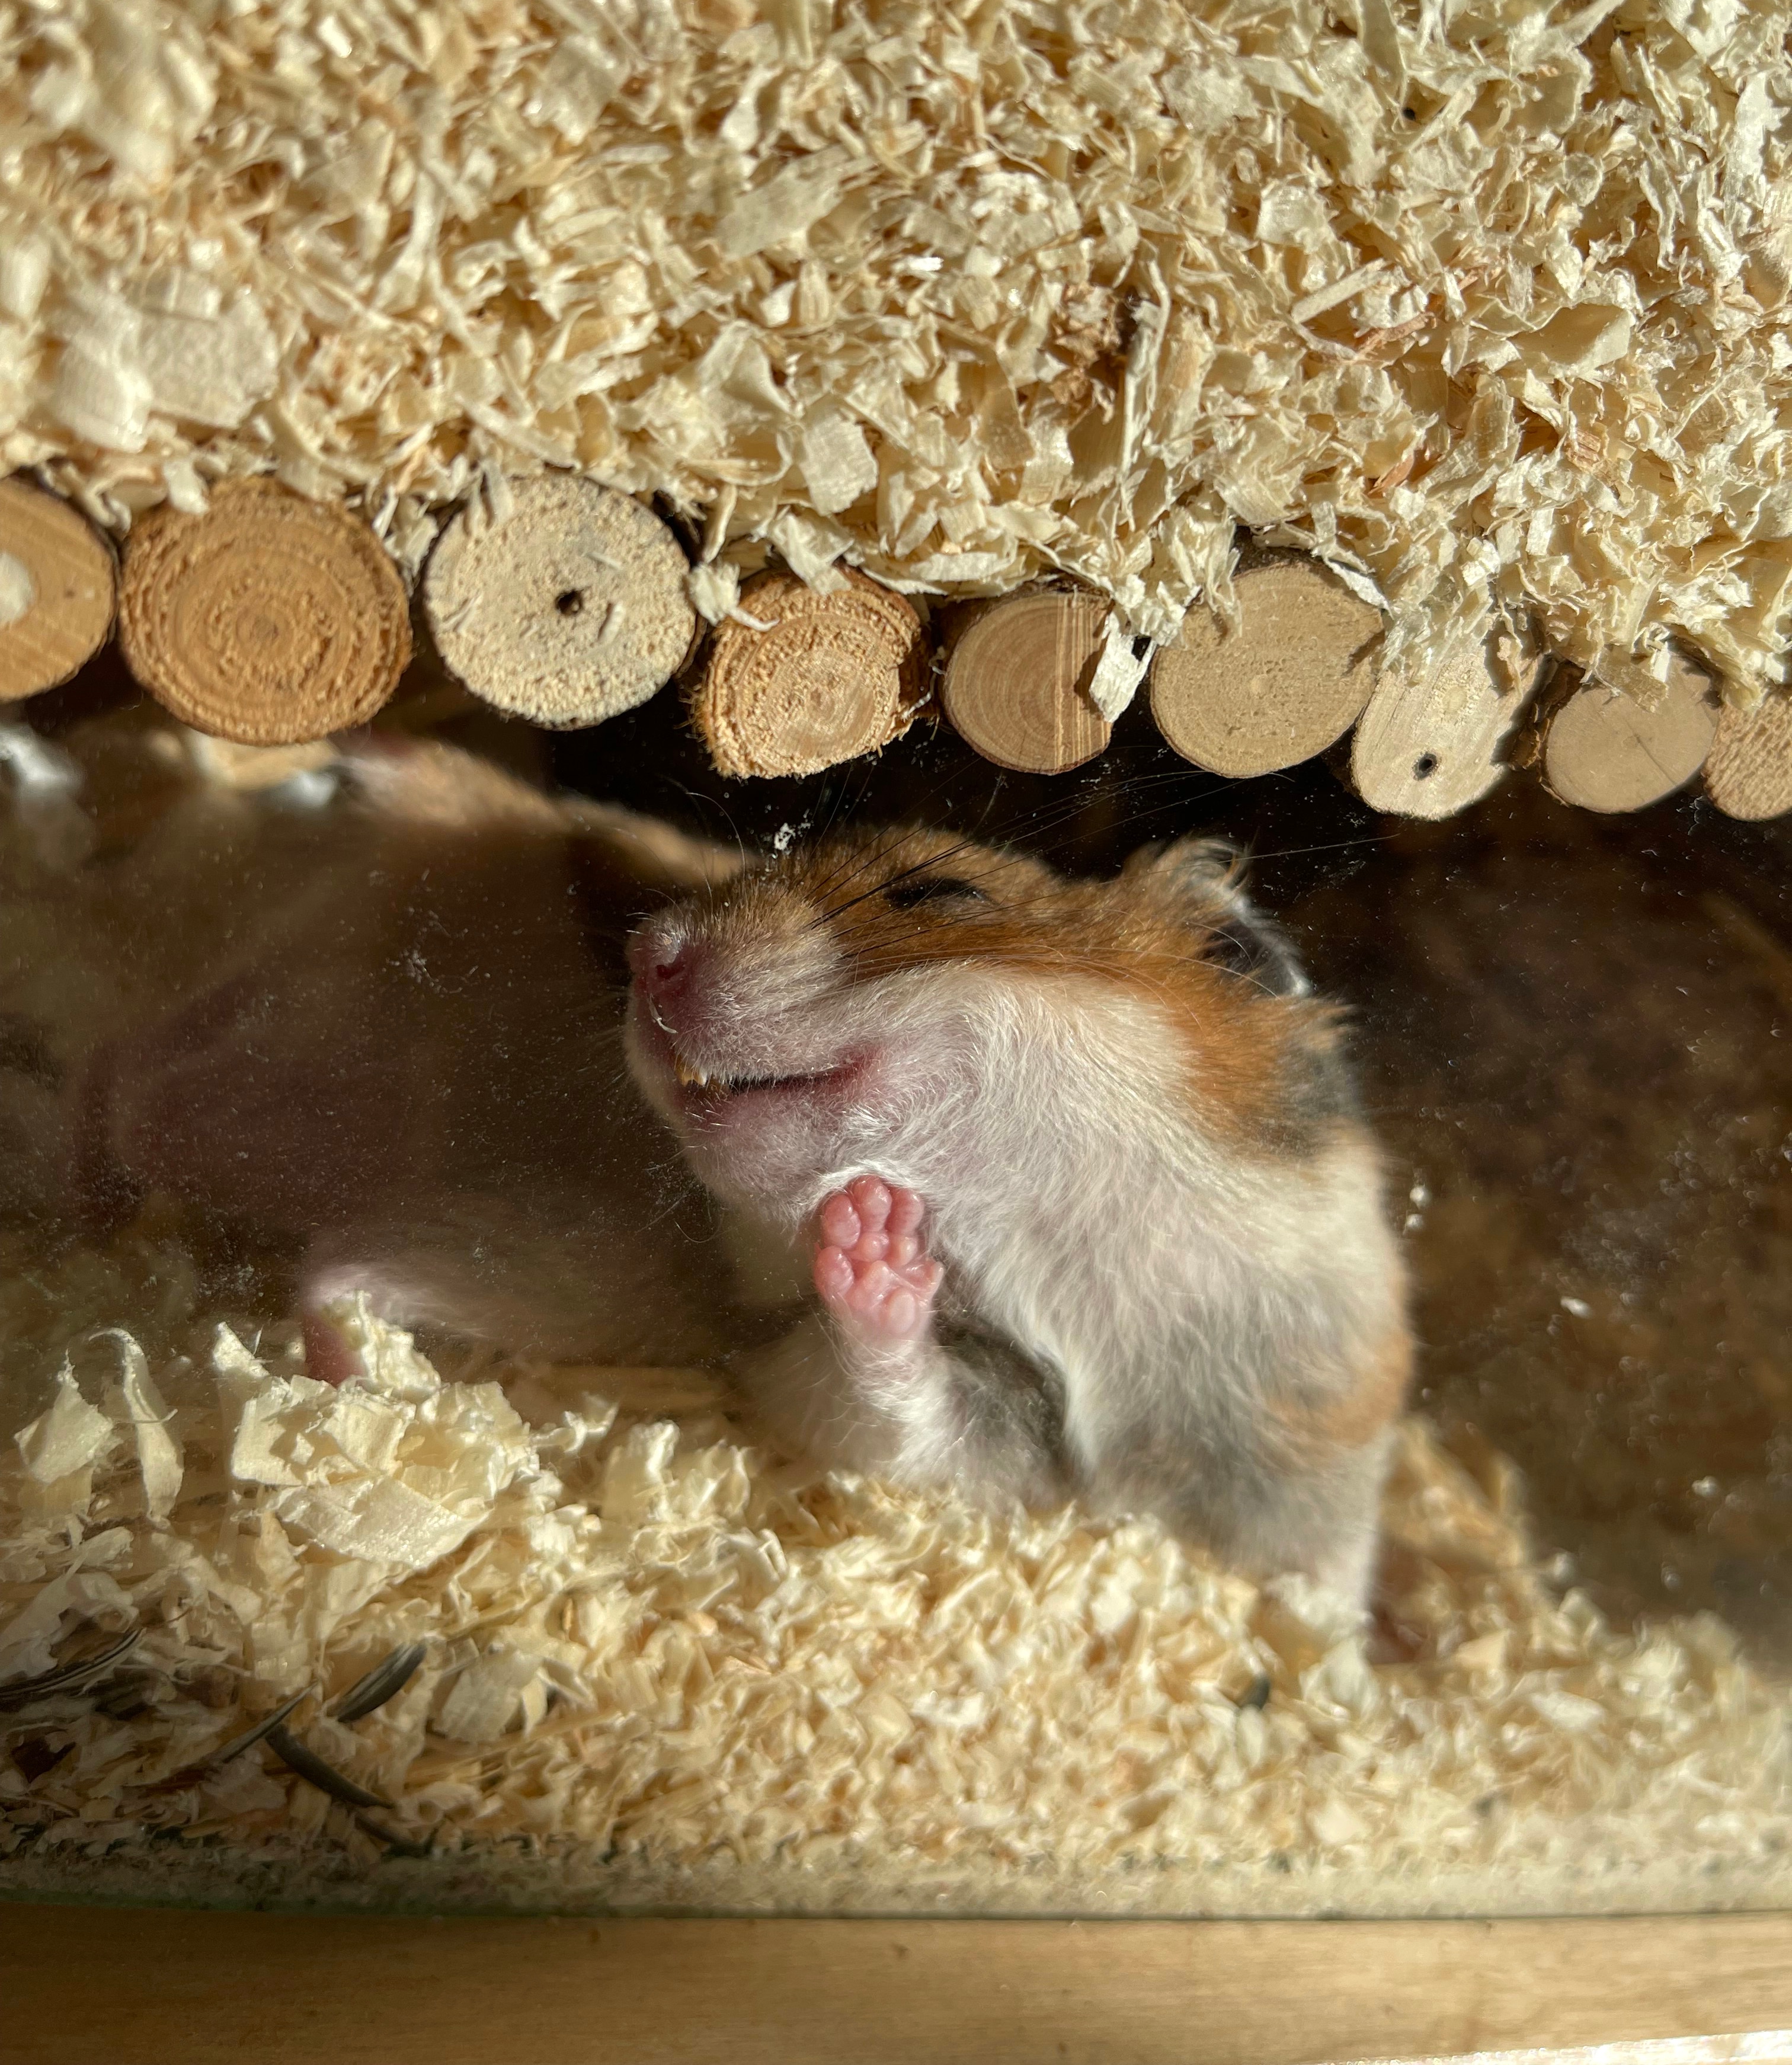 A hamster pressed up against the glass trying to catch the sun